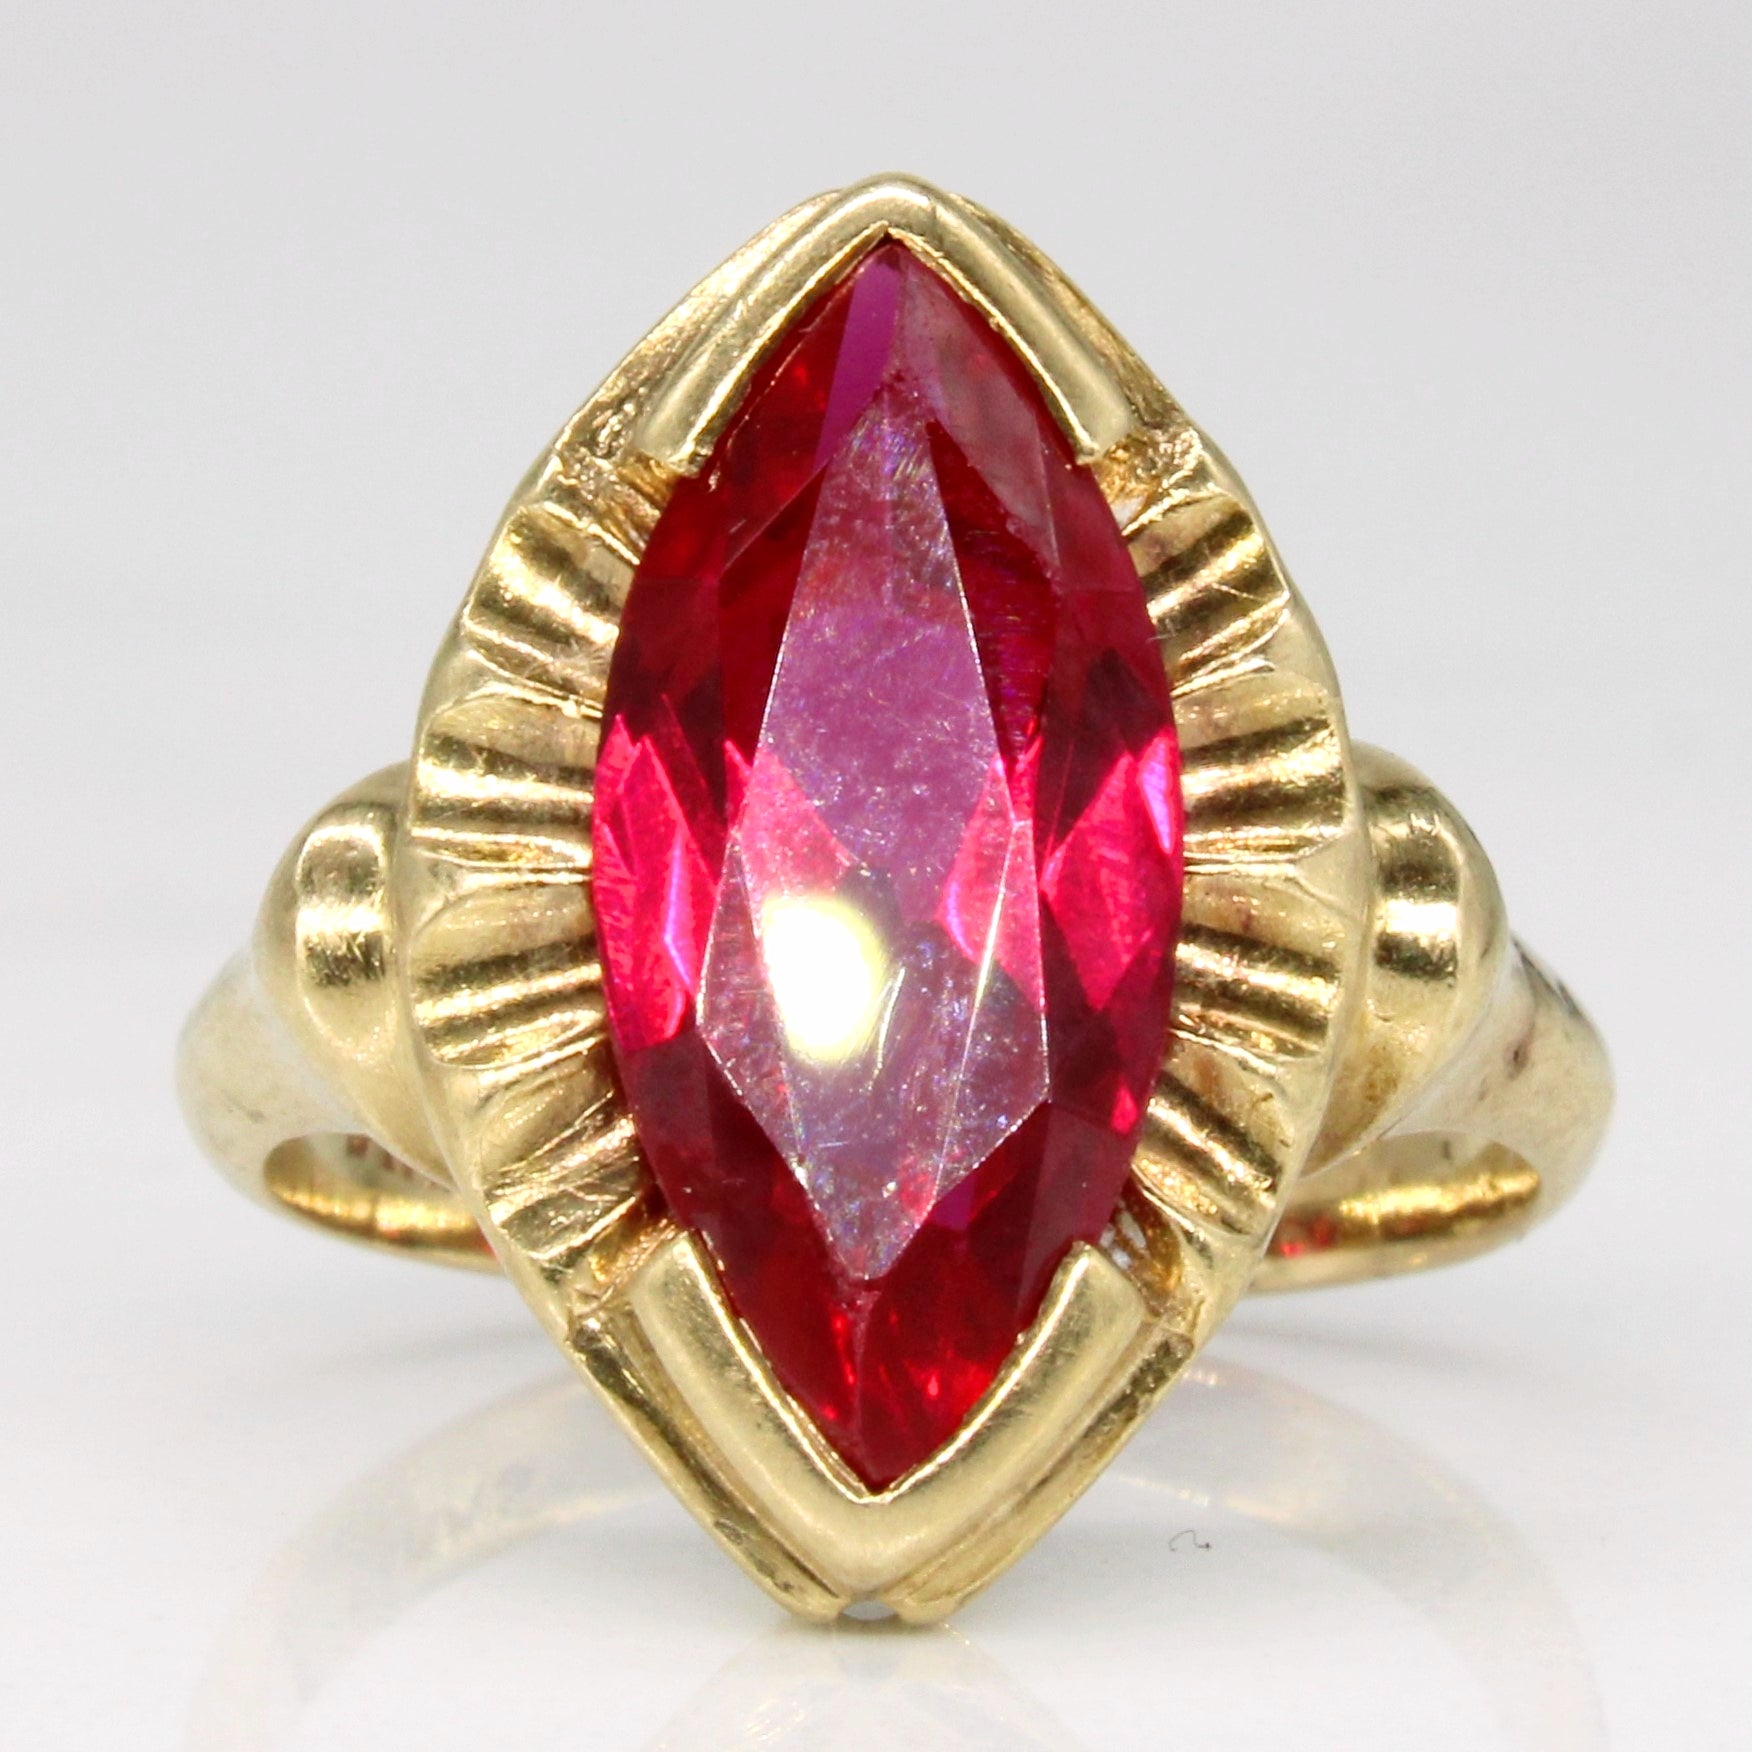 'Birks' Synthetic Ruby Cocktail Ring | 2.75ct | SZ 4 |